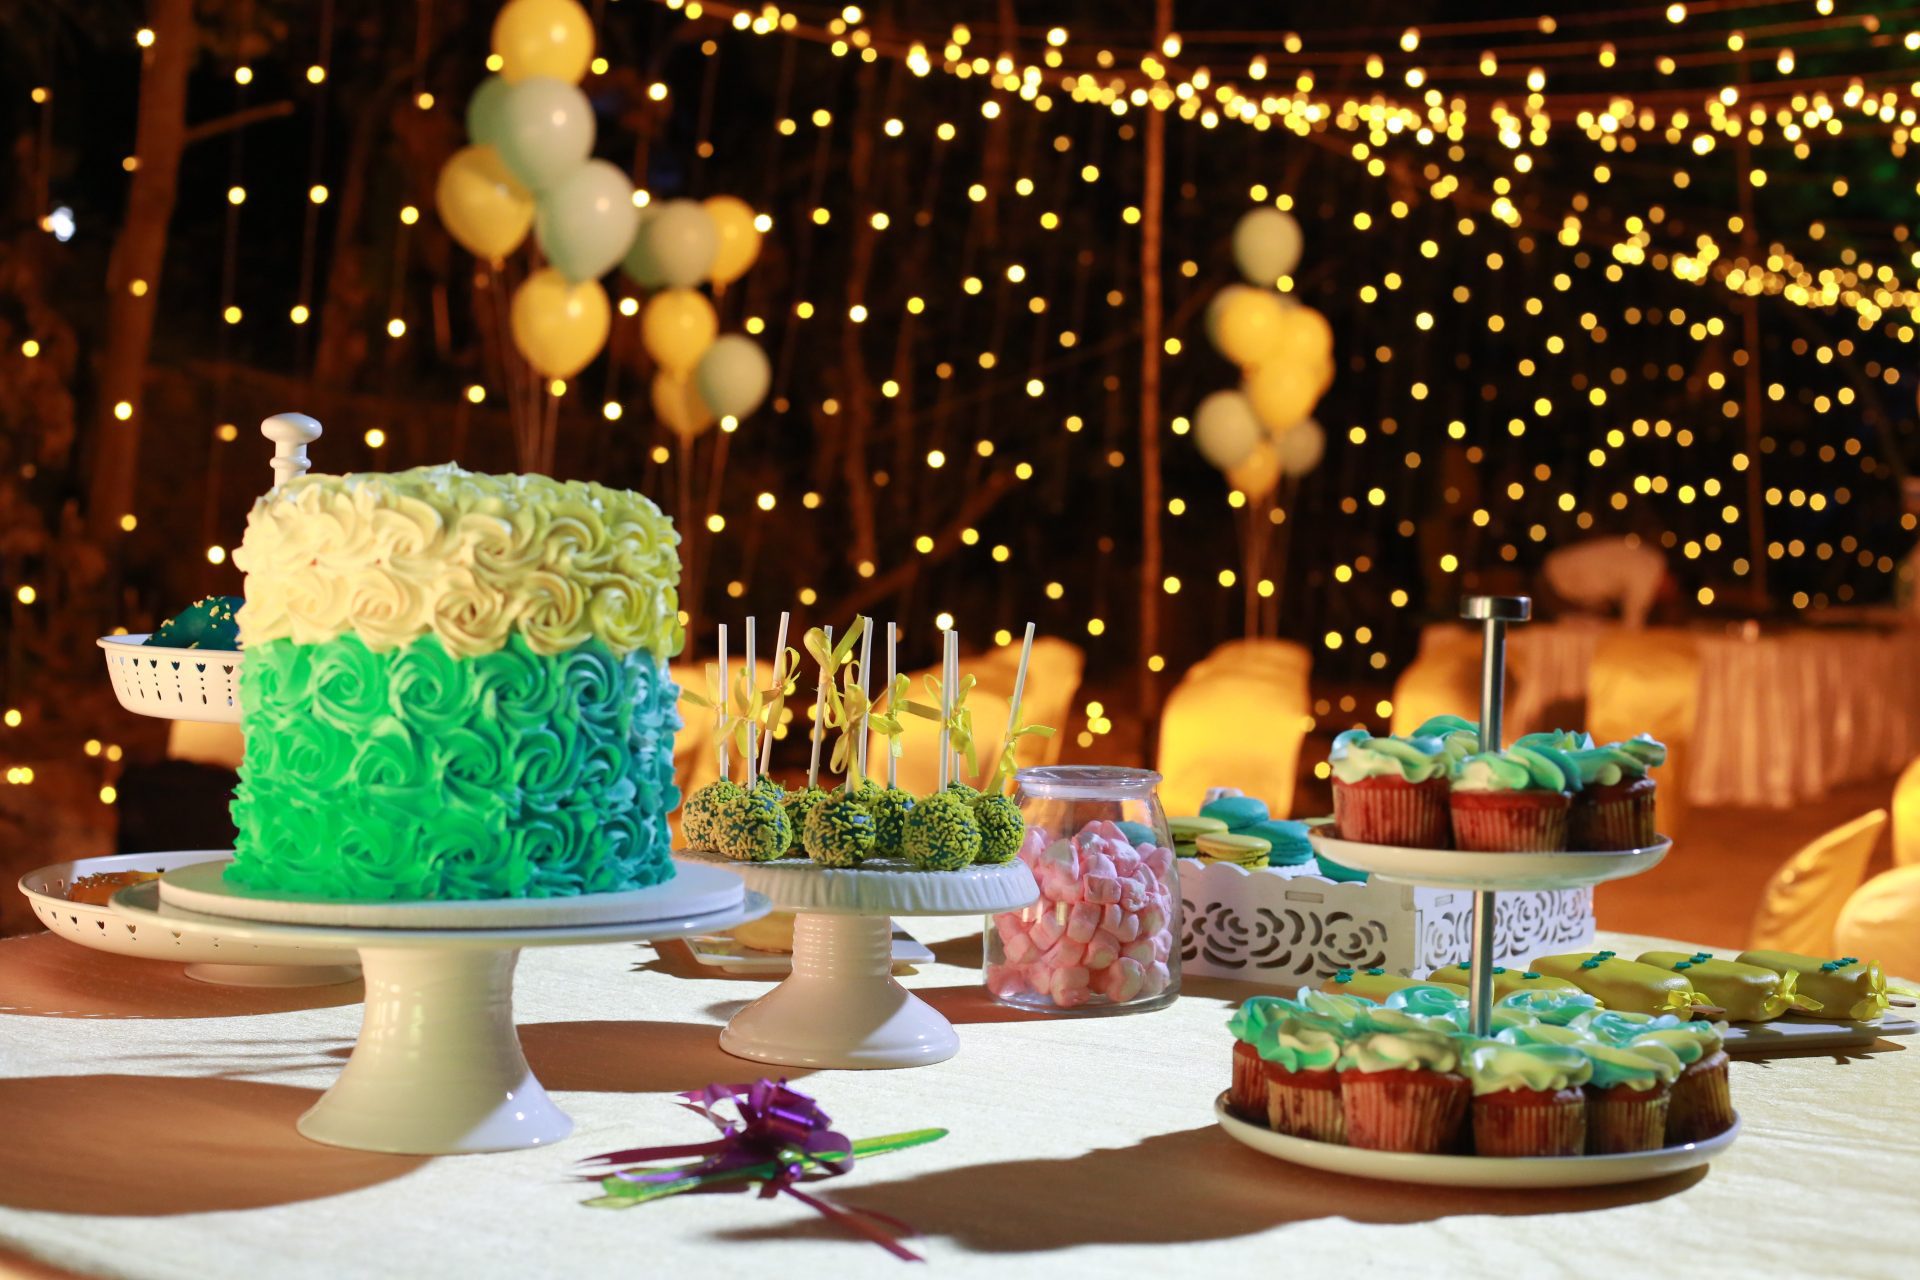 A decorative background with lights and cakes on the table